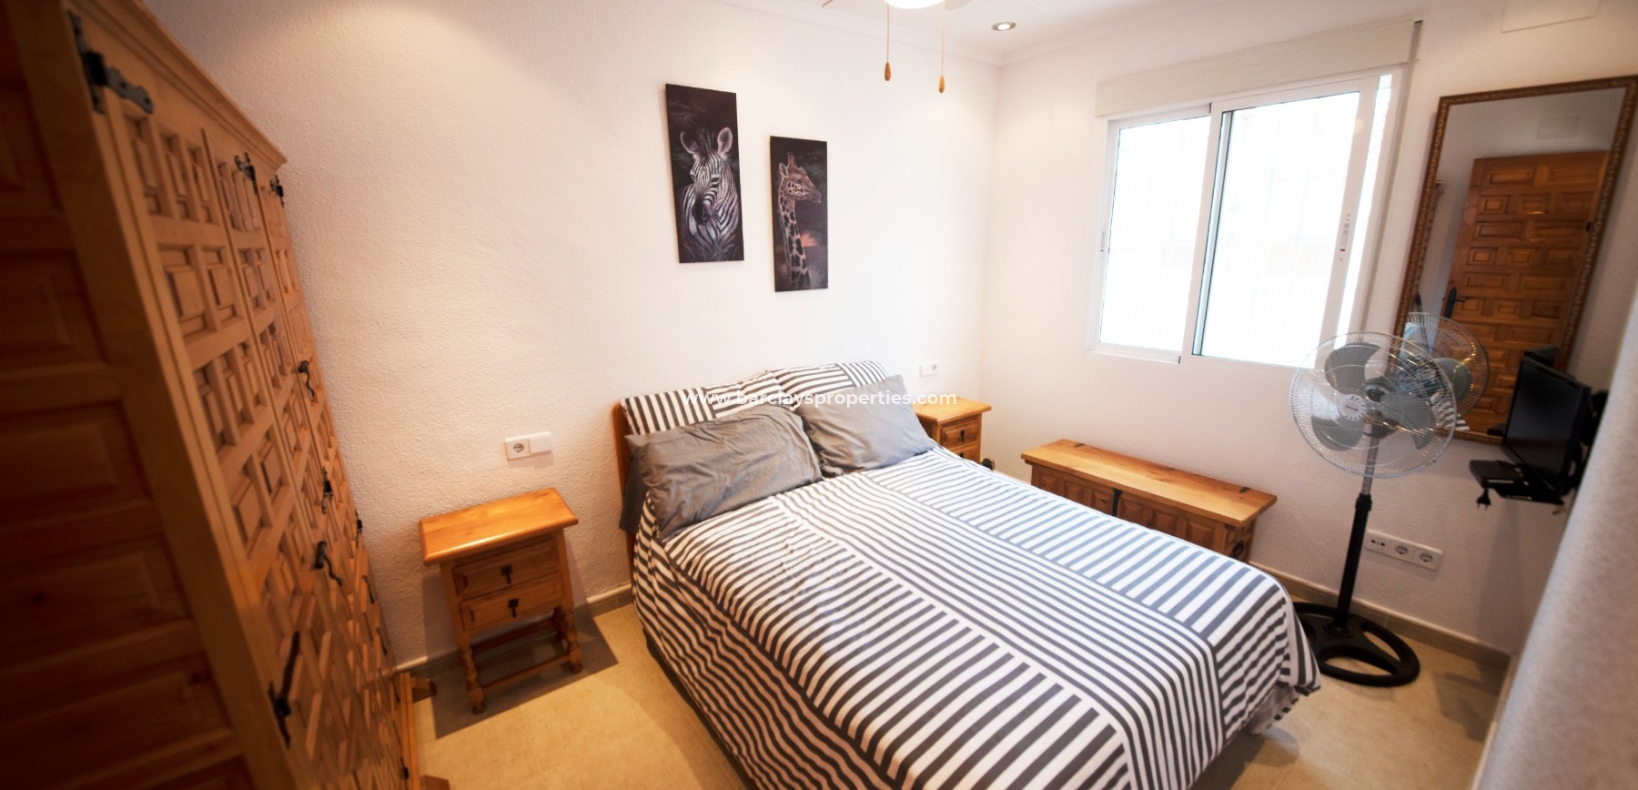 Bedroom - South Facing Terraced House For Sale in Alicante, Spain